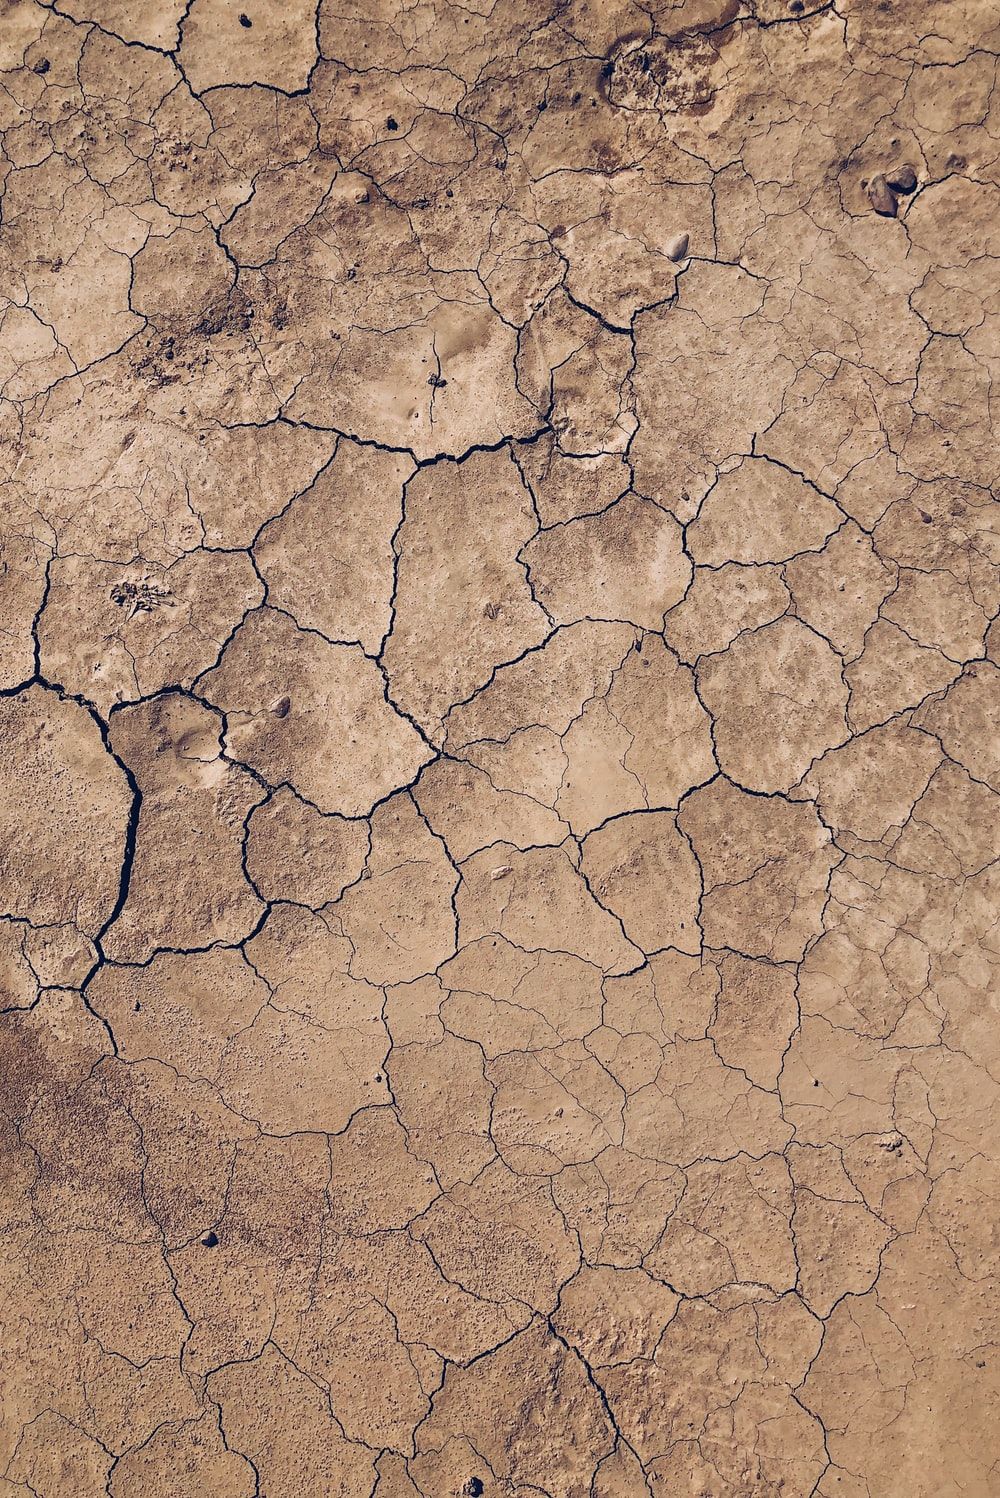 Drought Picture. Download Free Image